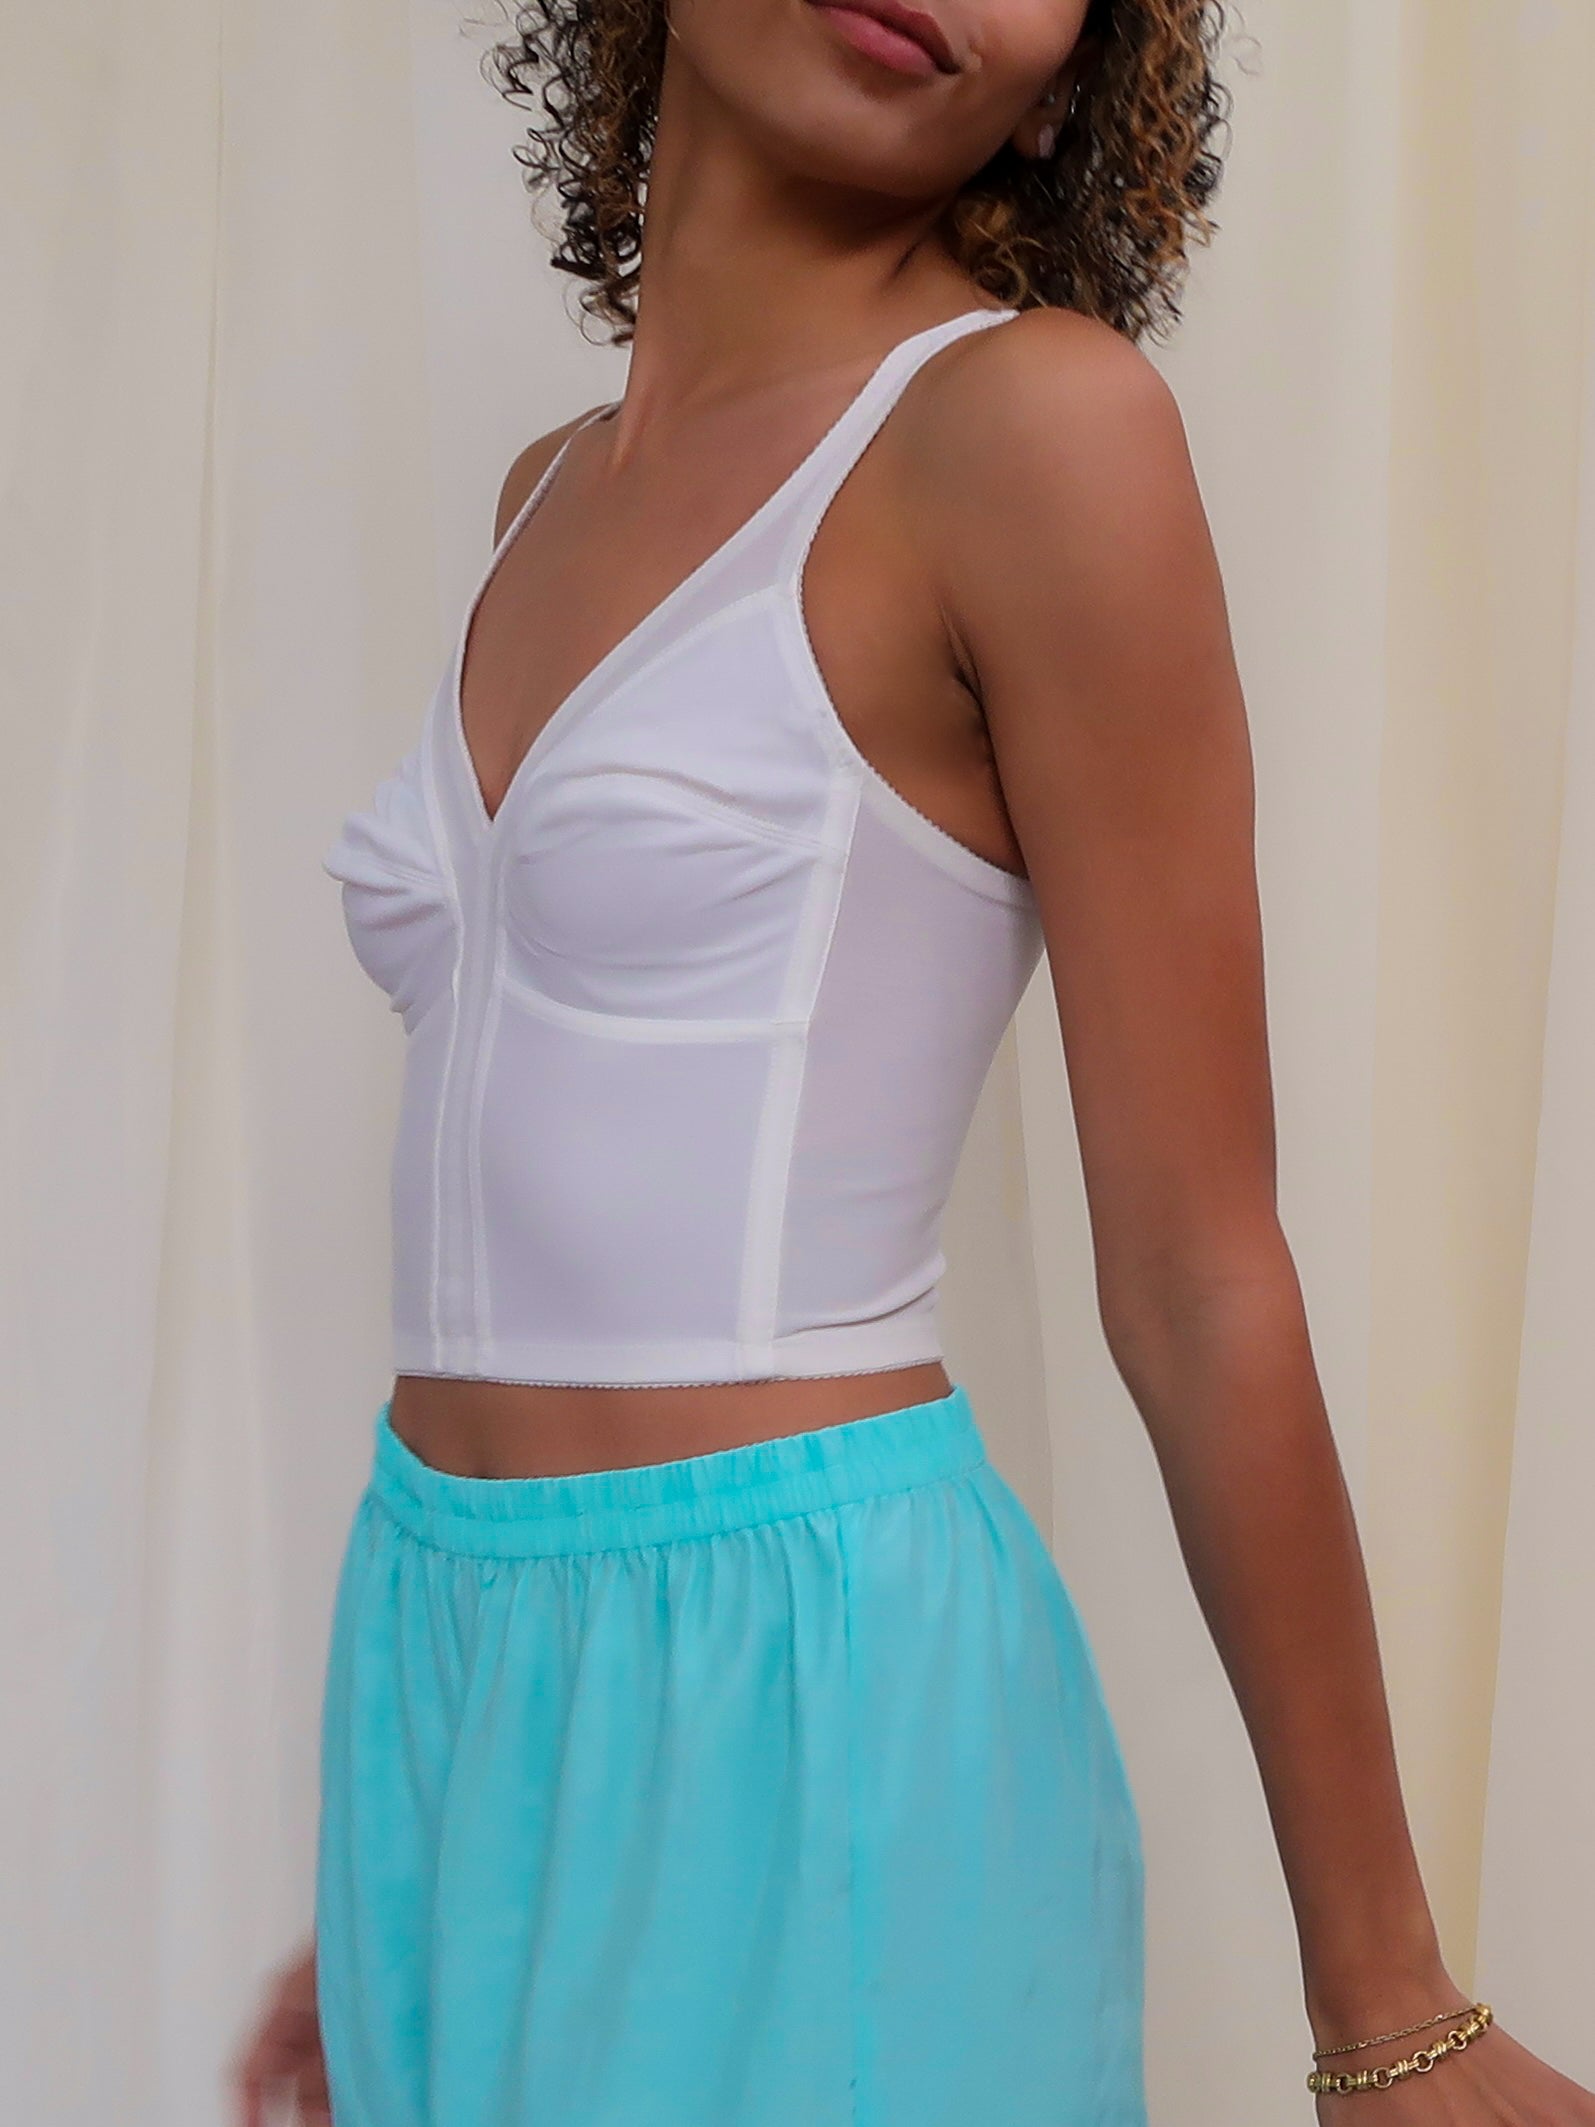 1980s SPORTY VINTAGE BUSTIER BRA TOP - (SMALL)